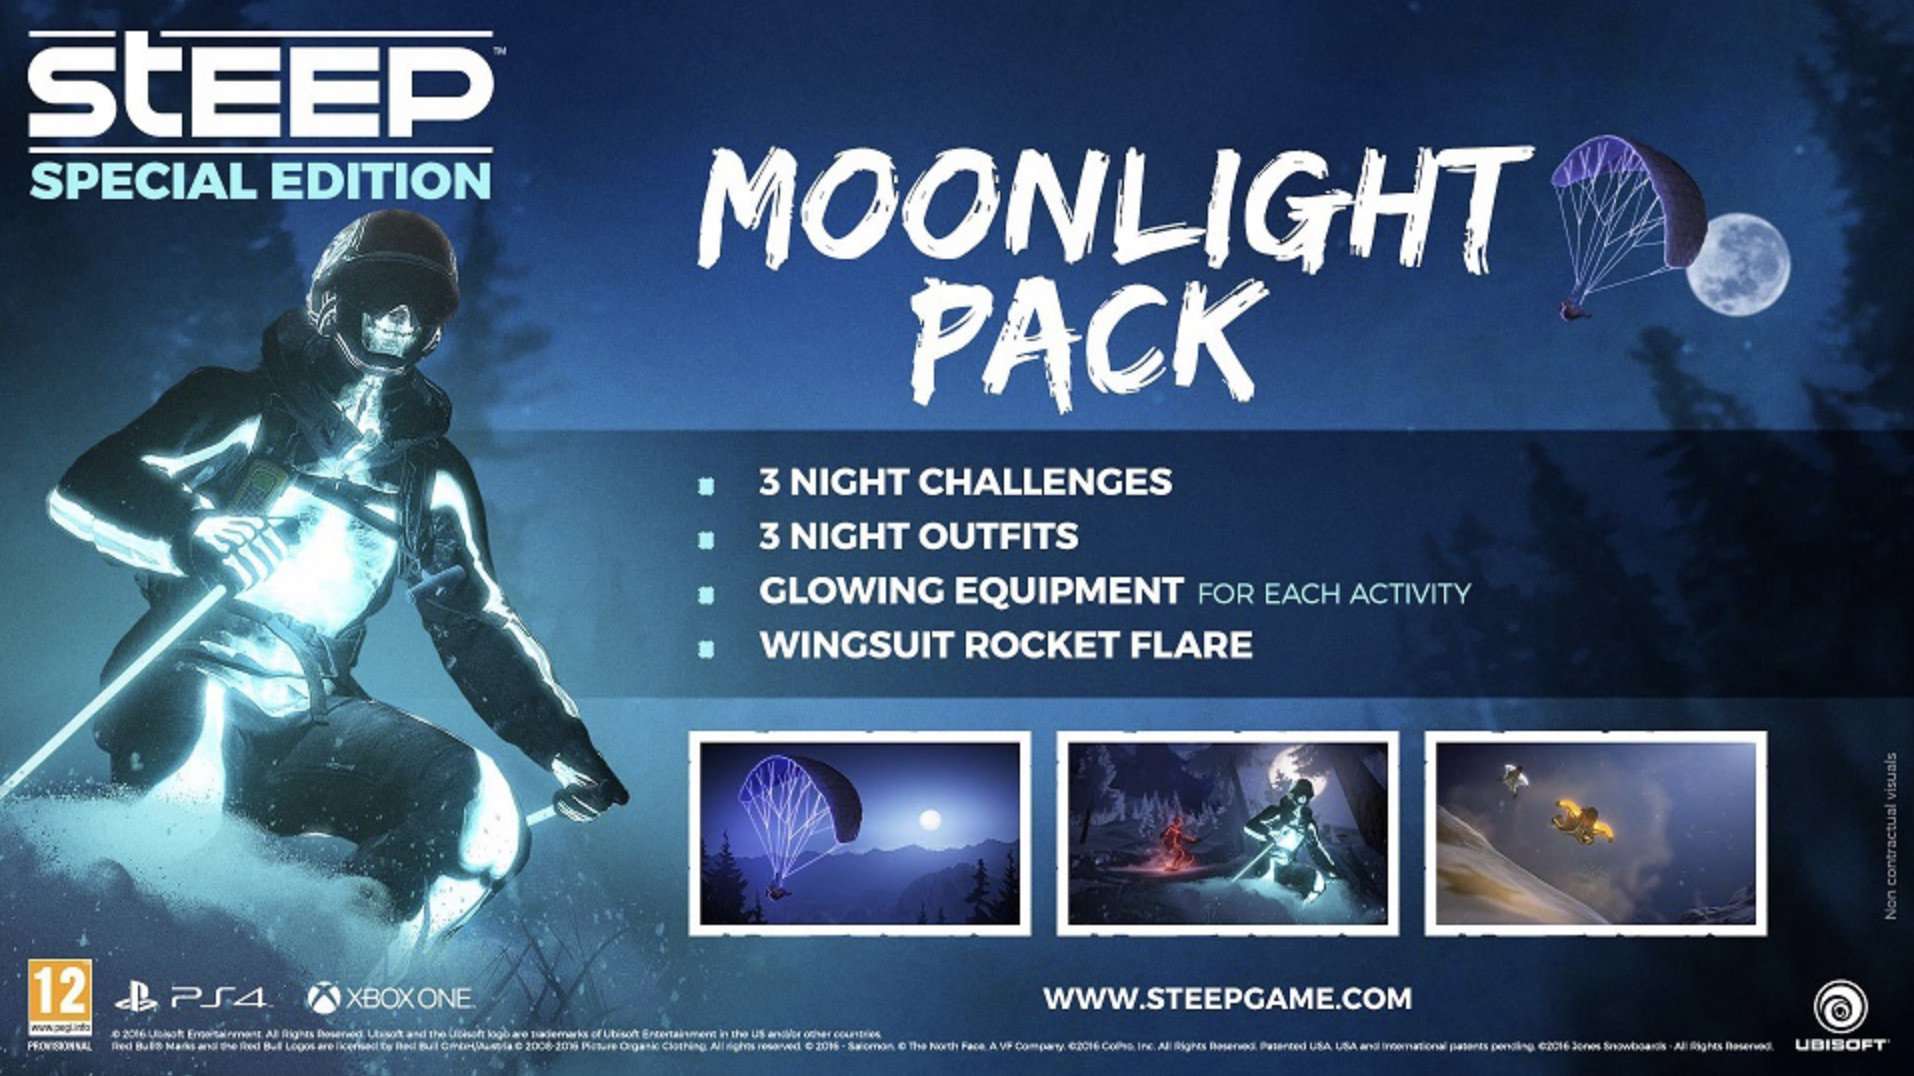 vamers-fyi-gaming-steep-special-edition-exclusive-to-bt-games-moonlight-pack-dlc-information-official-01